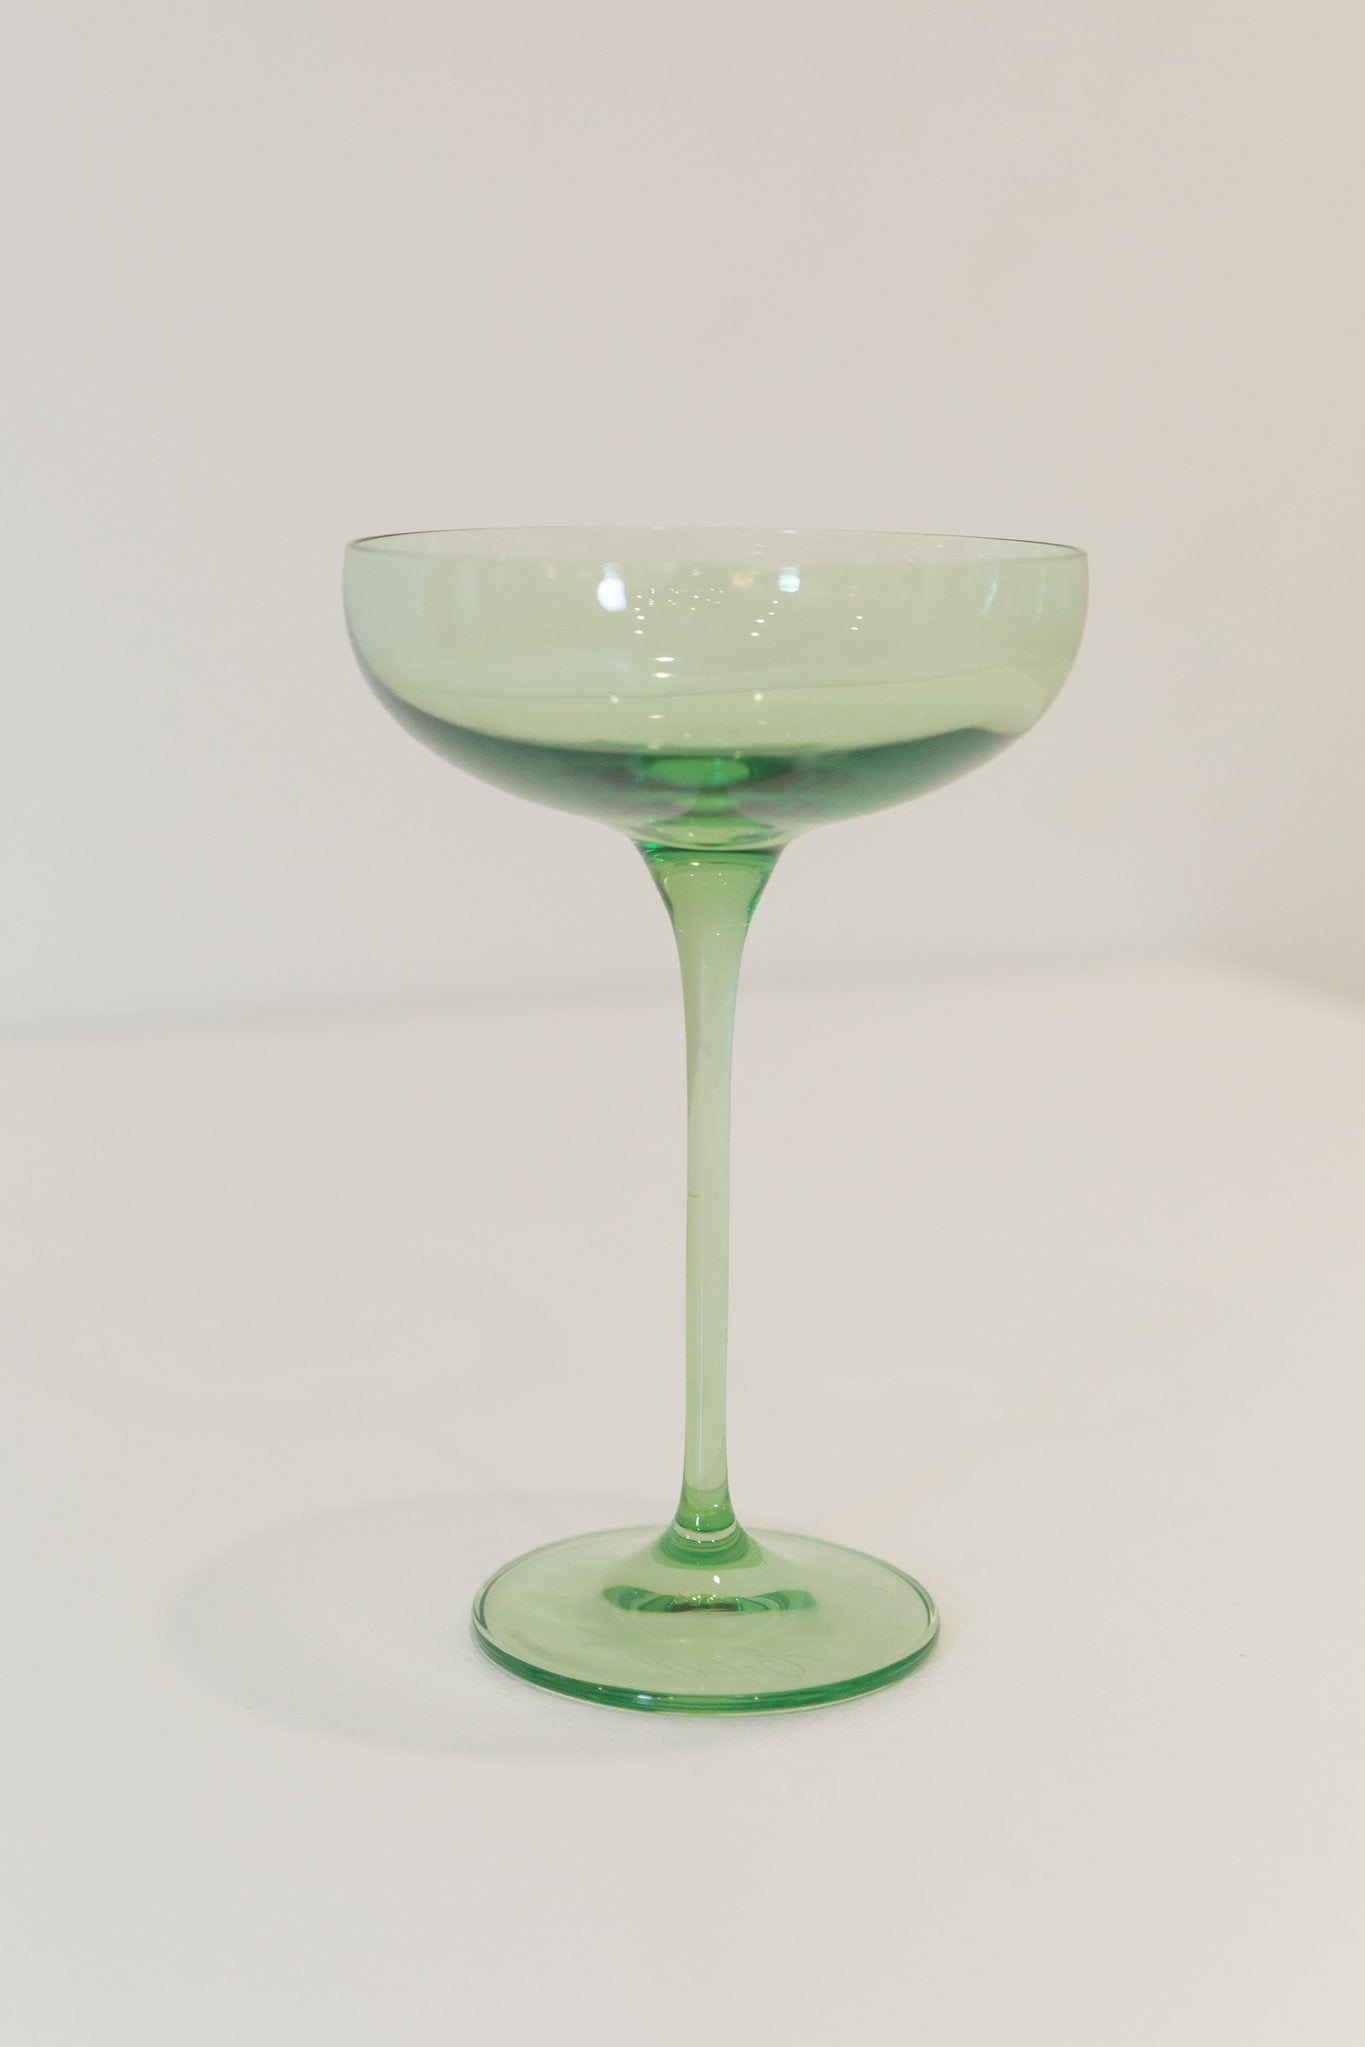 Champagne Coupe (Set of 2), Mint Green